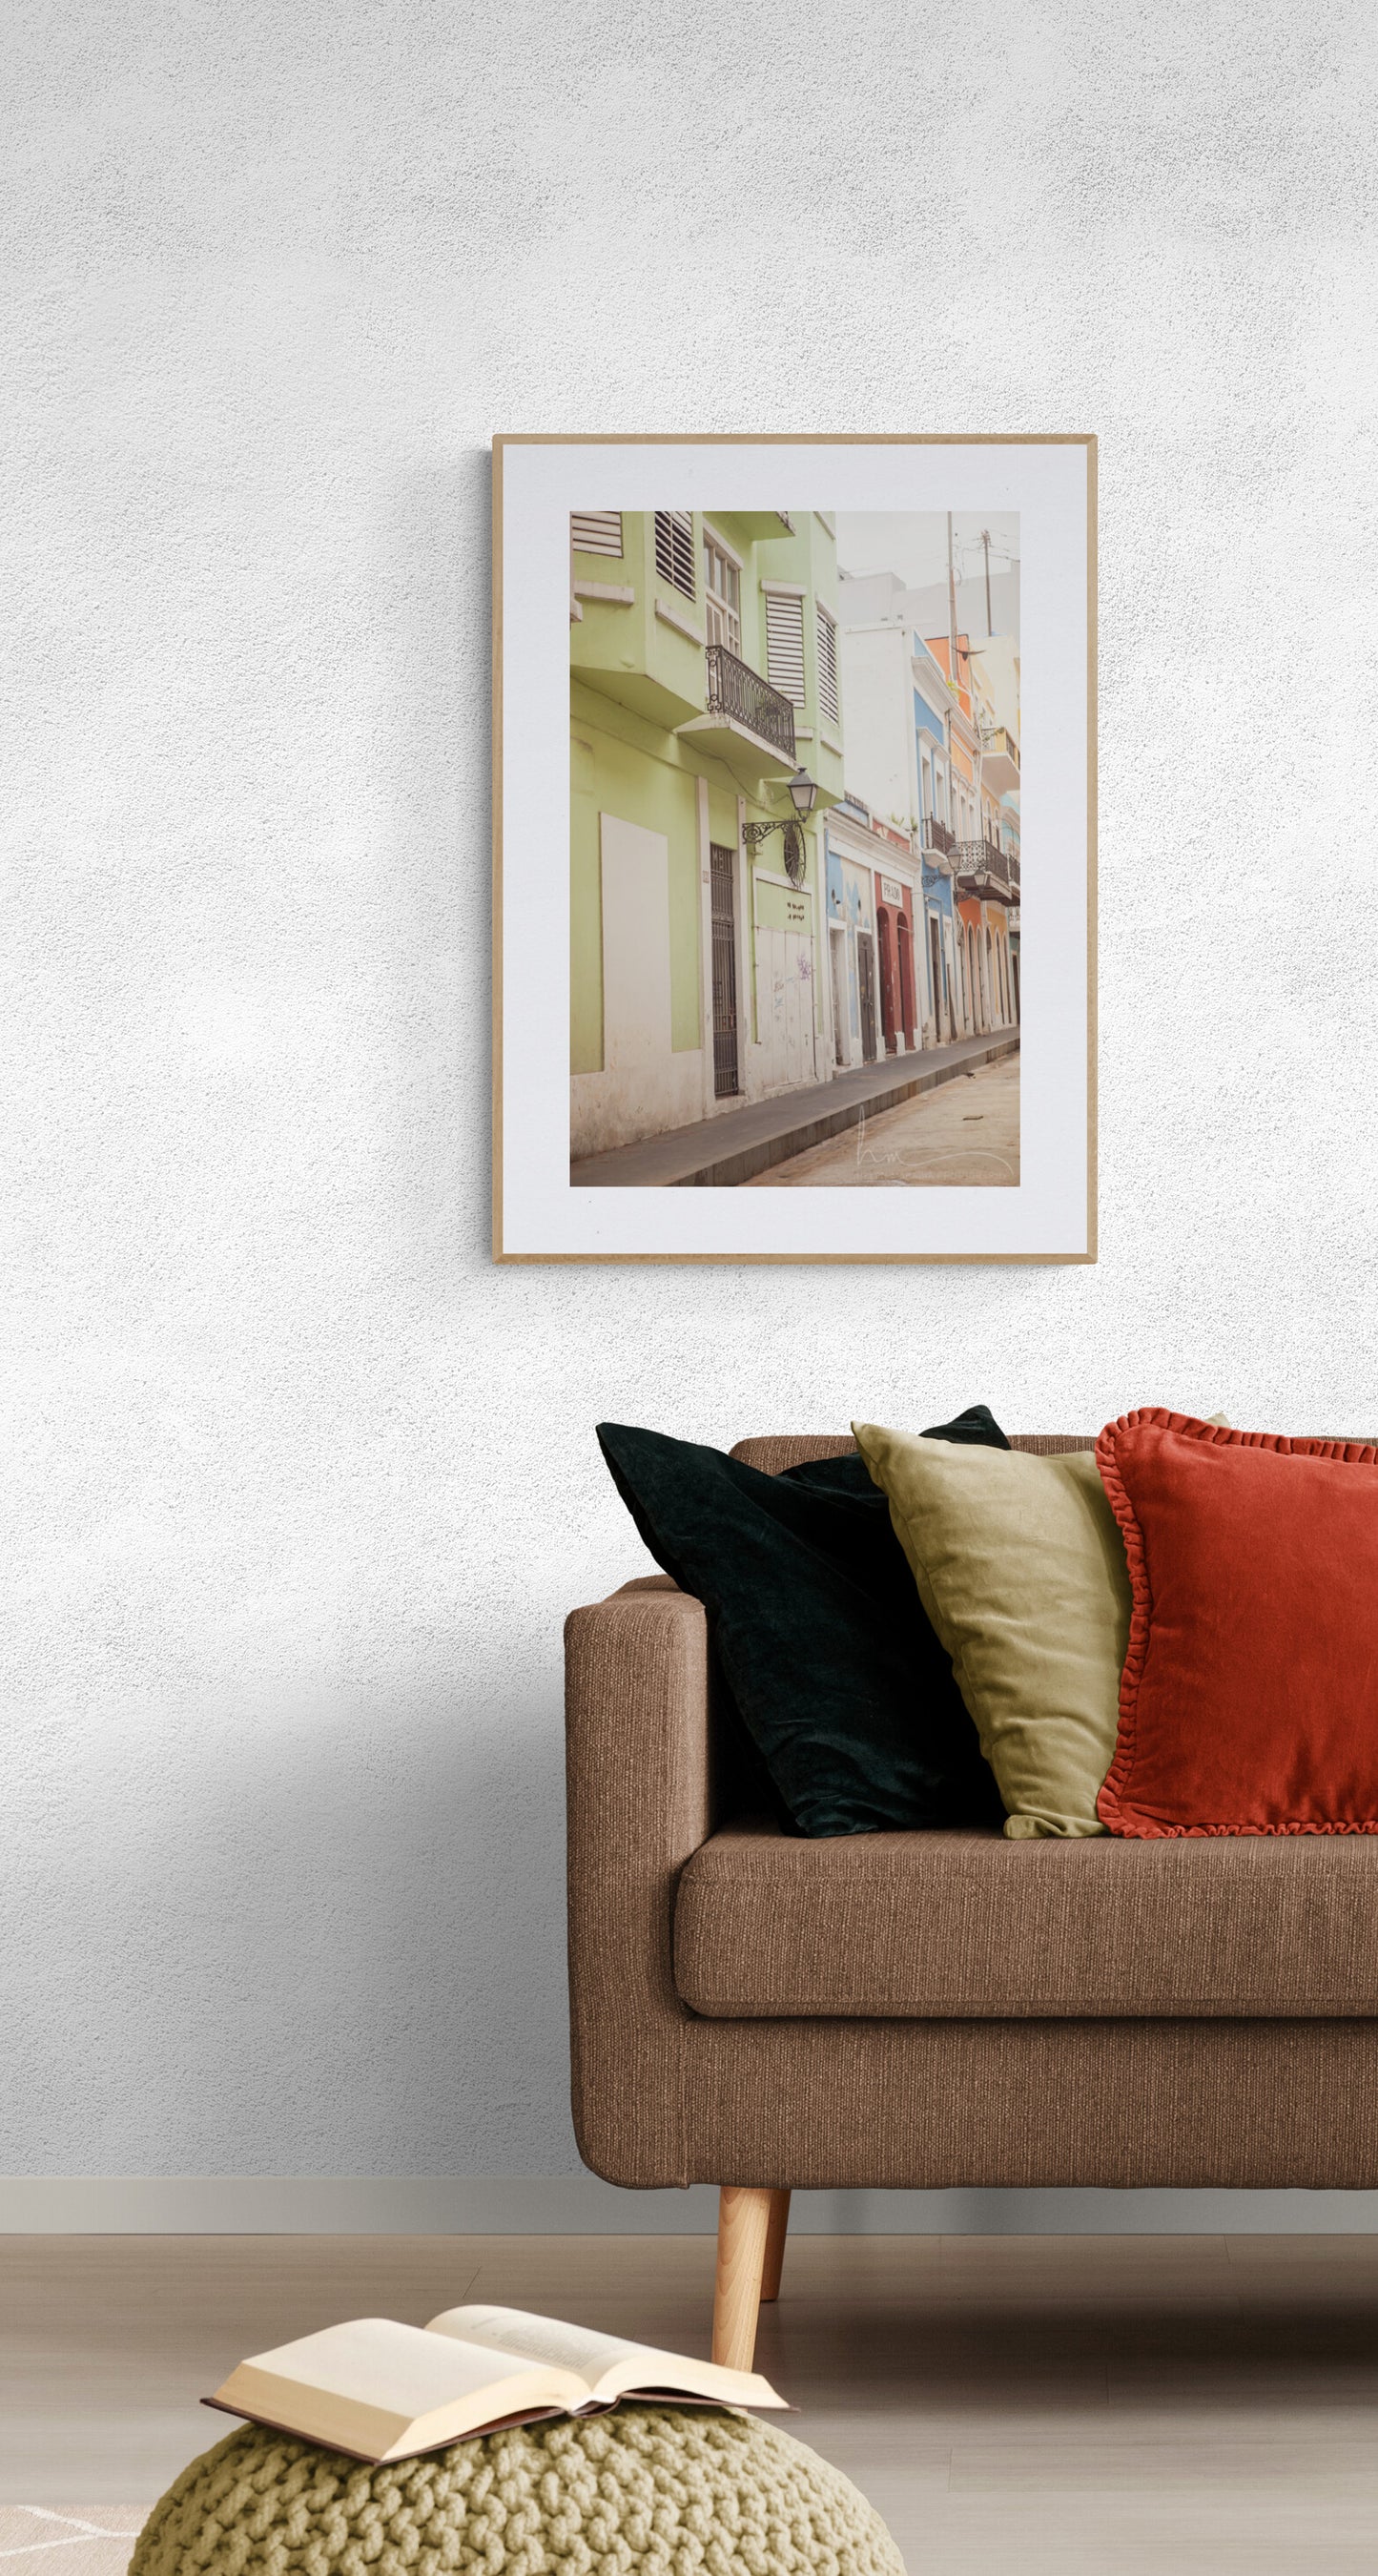 Framed Photograph of the Street of Old San Juan Puerto Rico in a Living Room